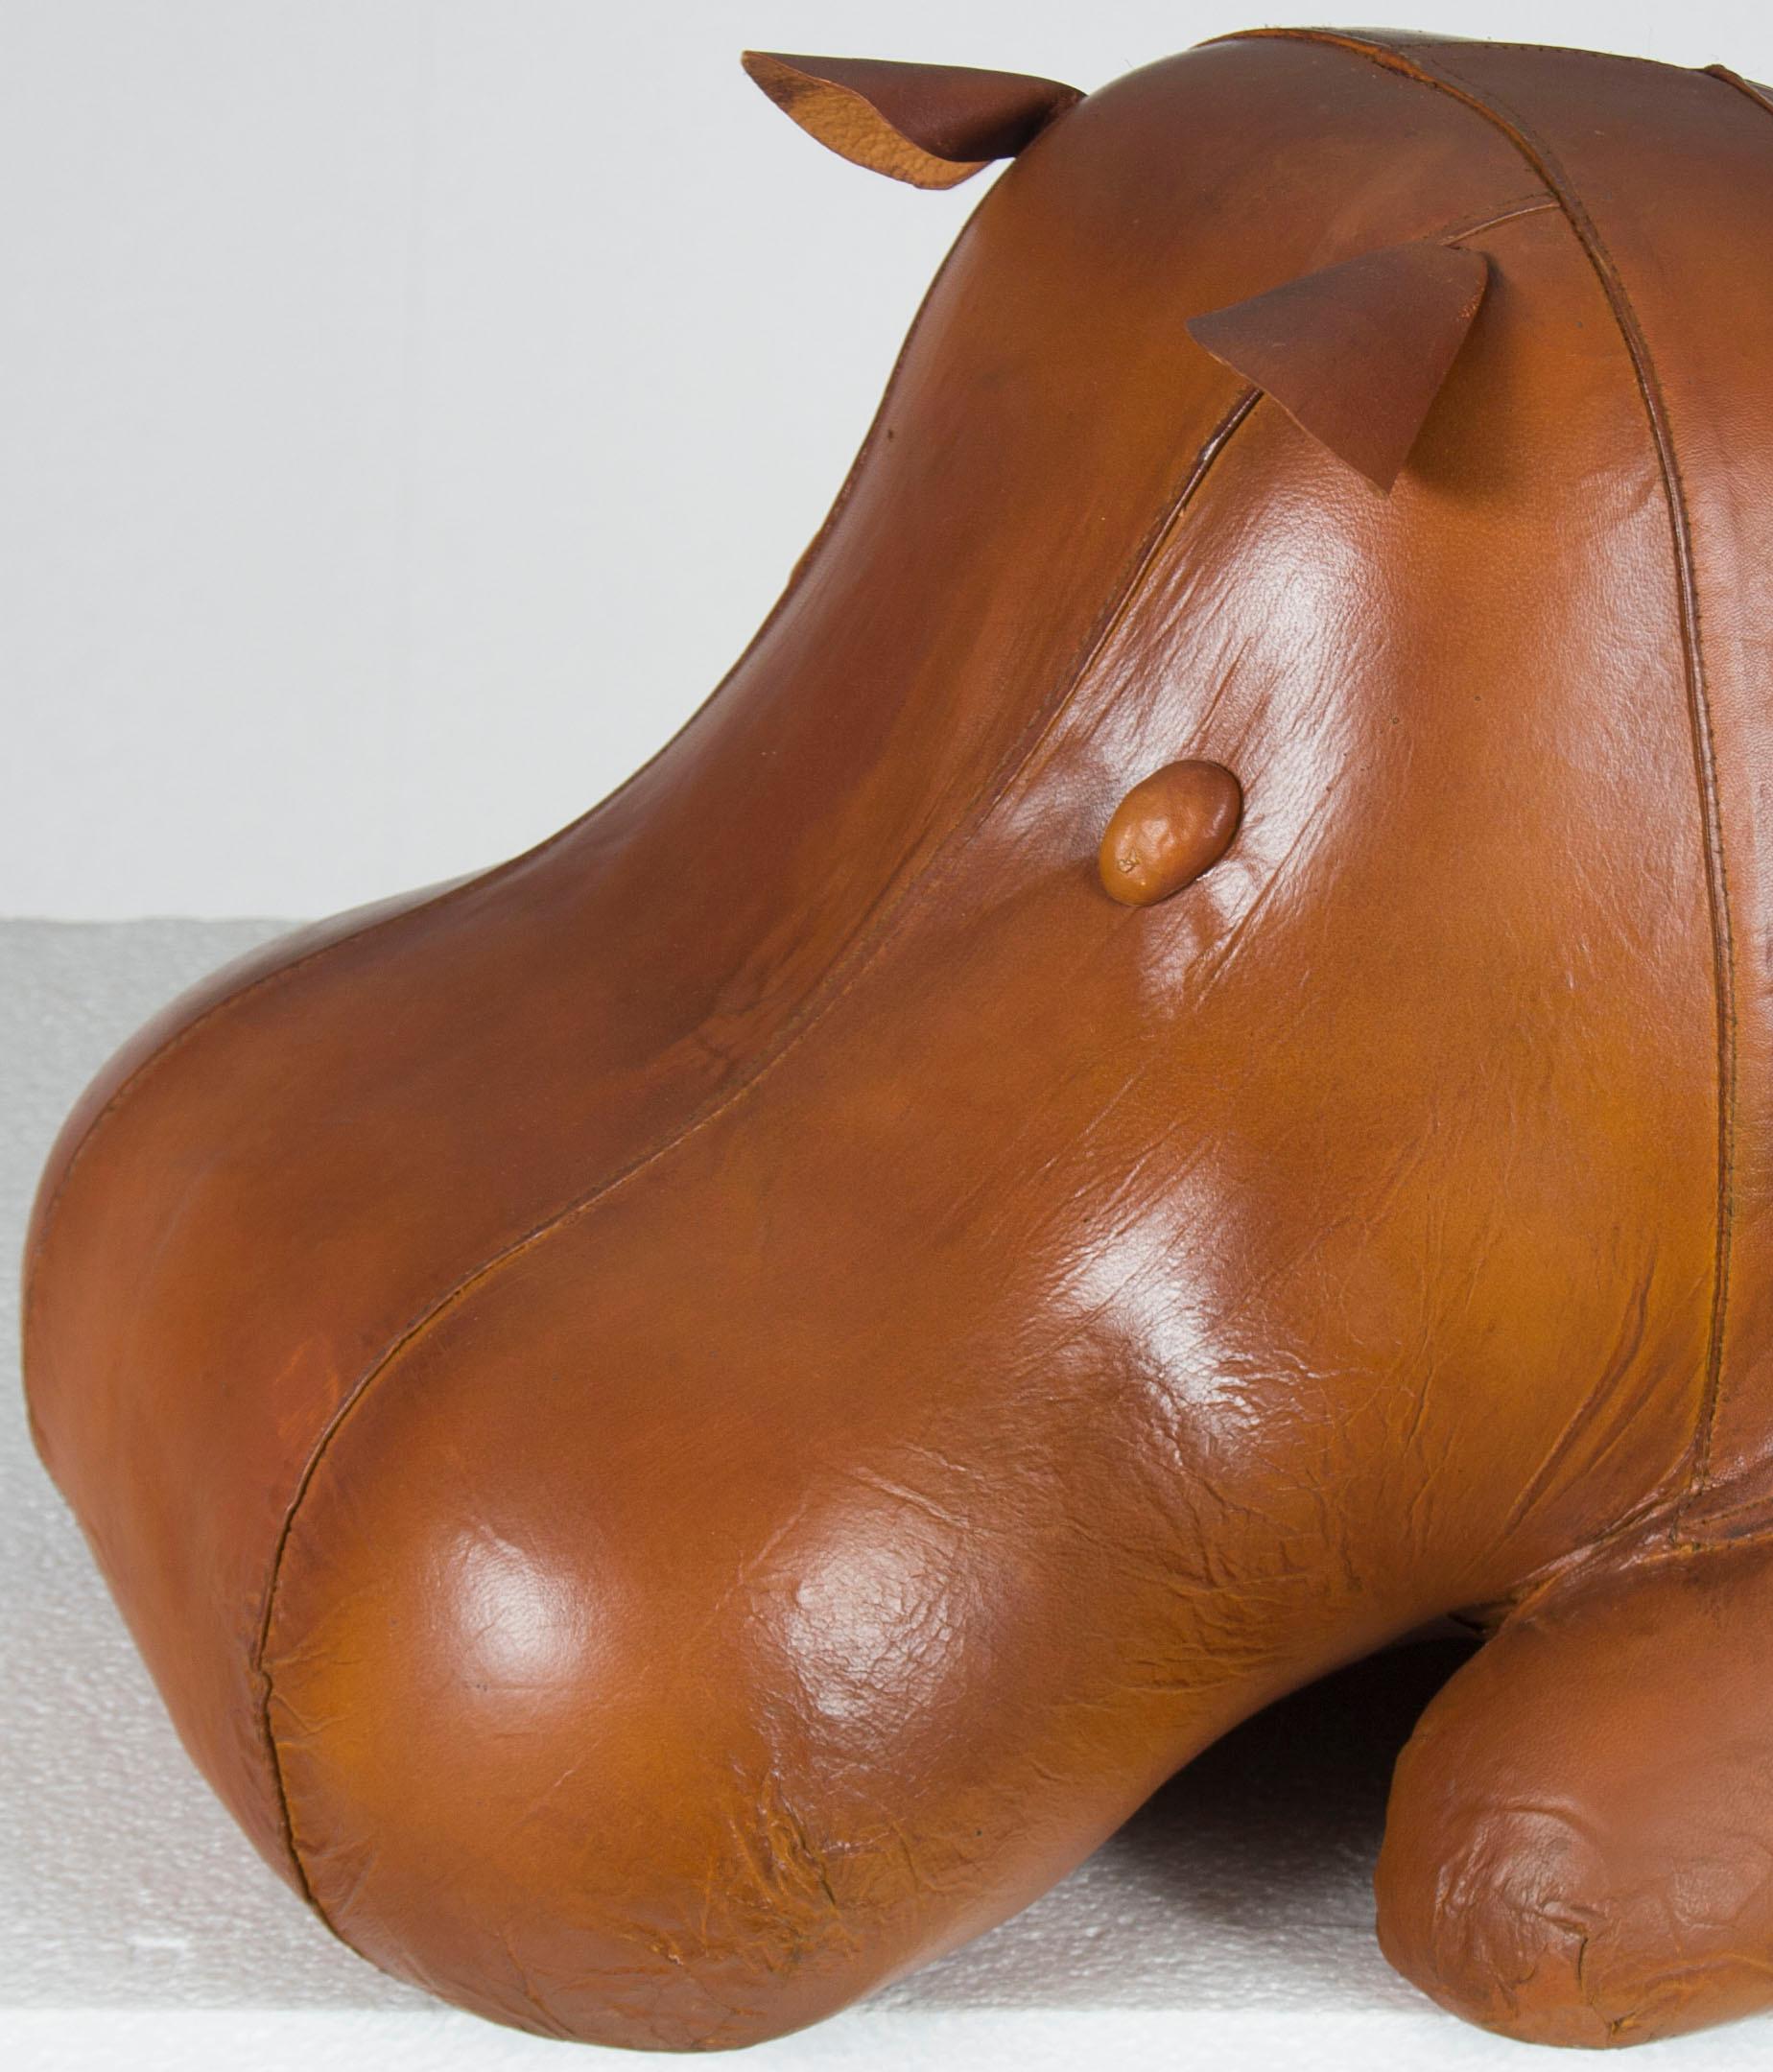 A unique version of our larger model, this incredibly cute laying leather hippo ottoman is made out of beautiful brown leather. It makes a sturdy footstool and beautiful piece of decor for your home. Newly handmade in England, the superb quality is